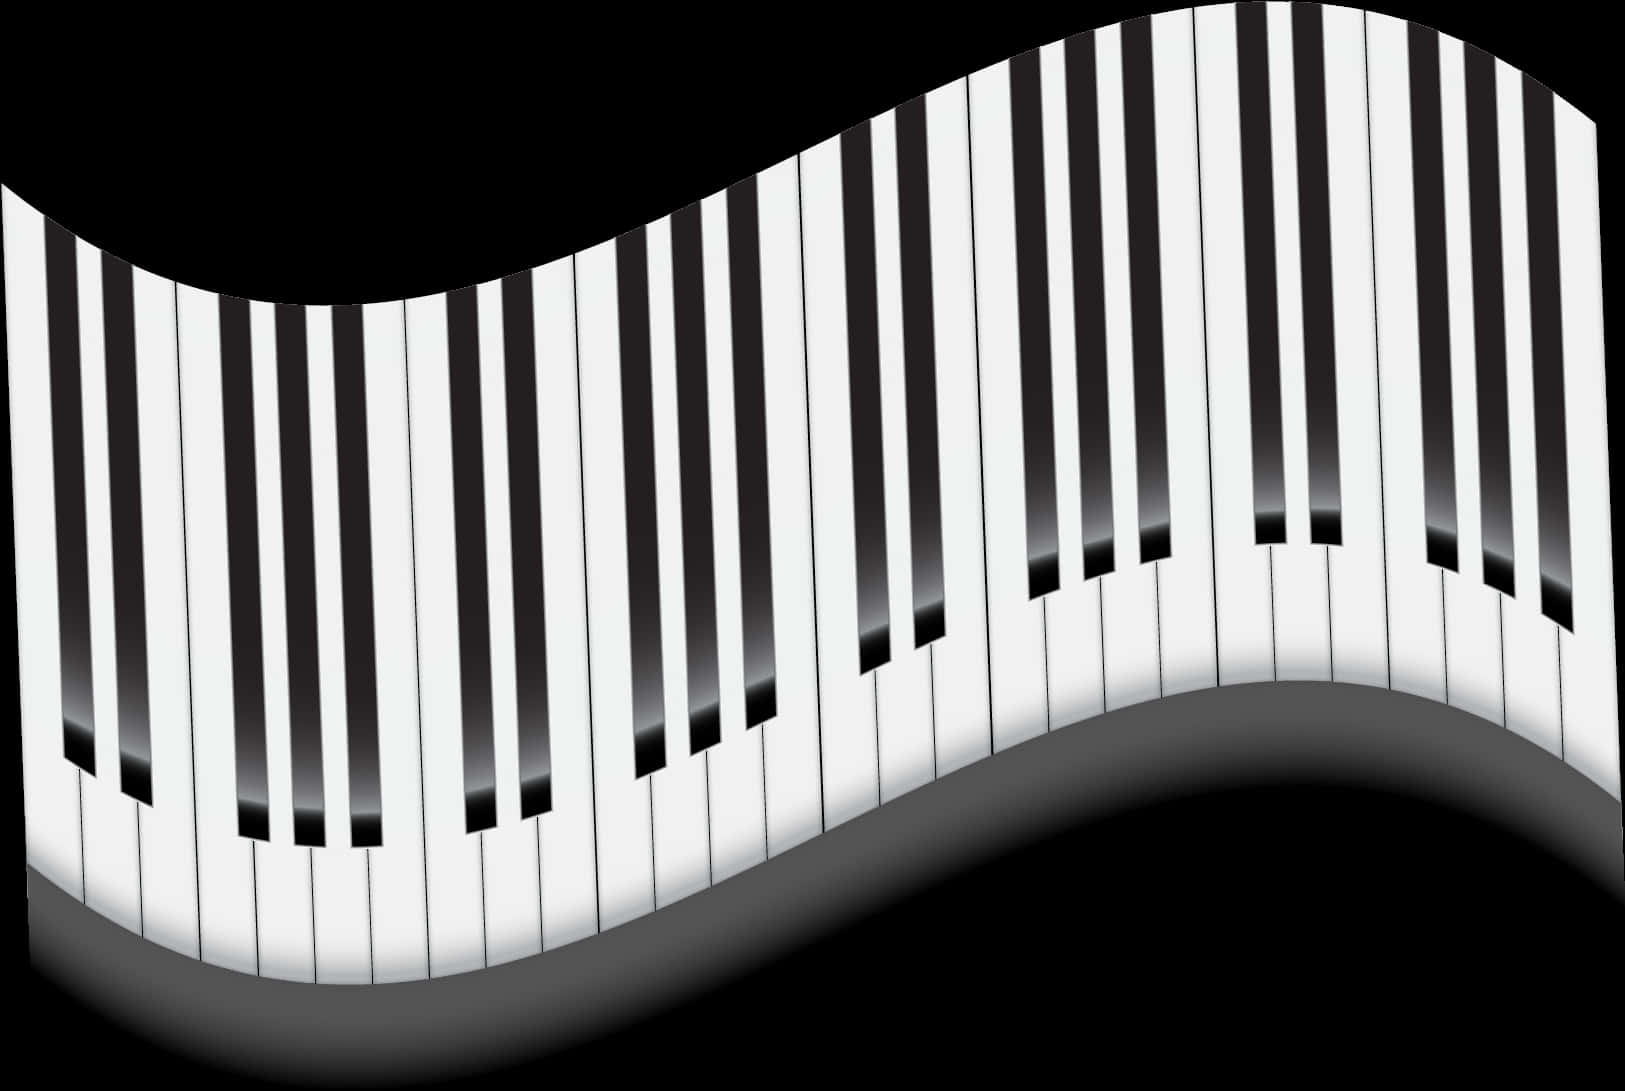 A Black And White Piano Keyboard